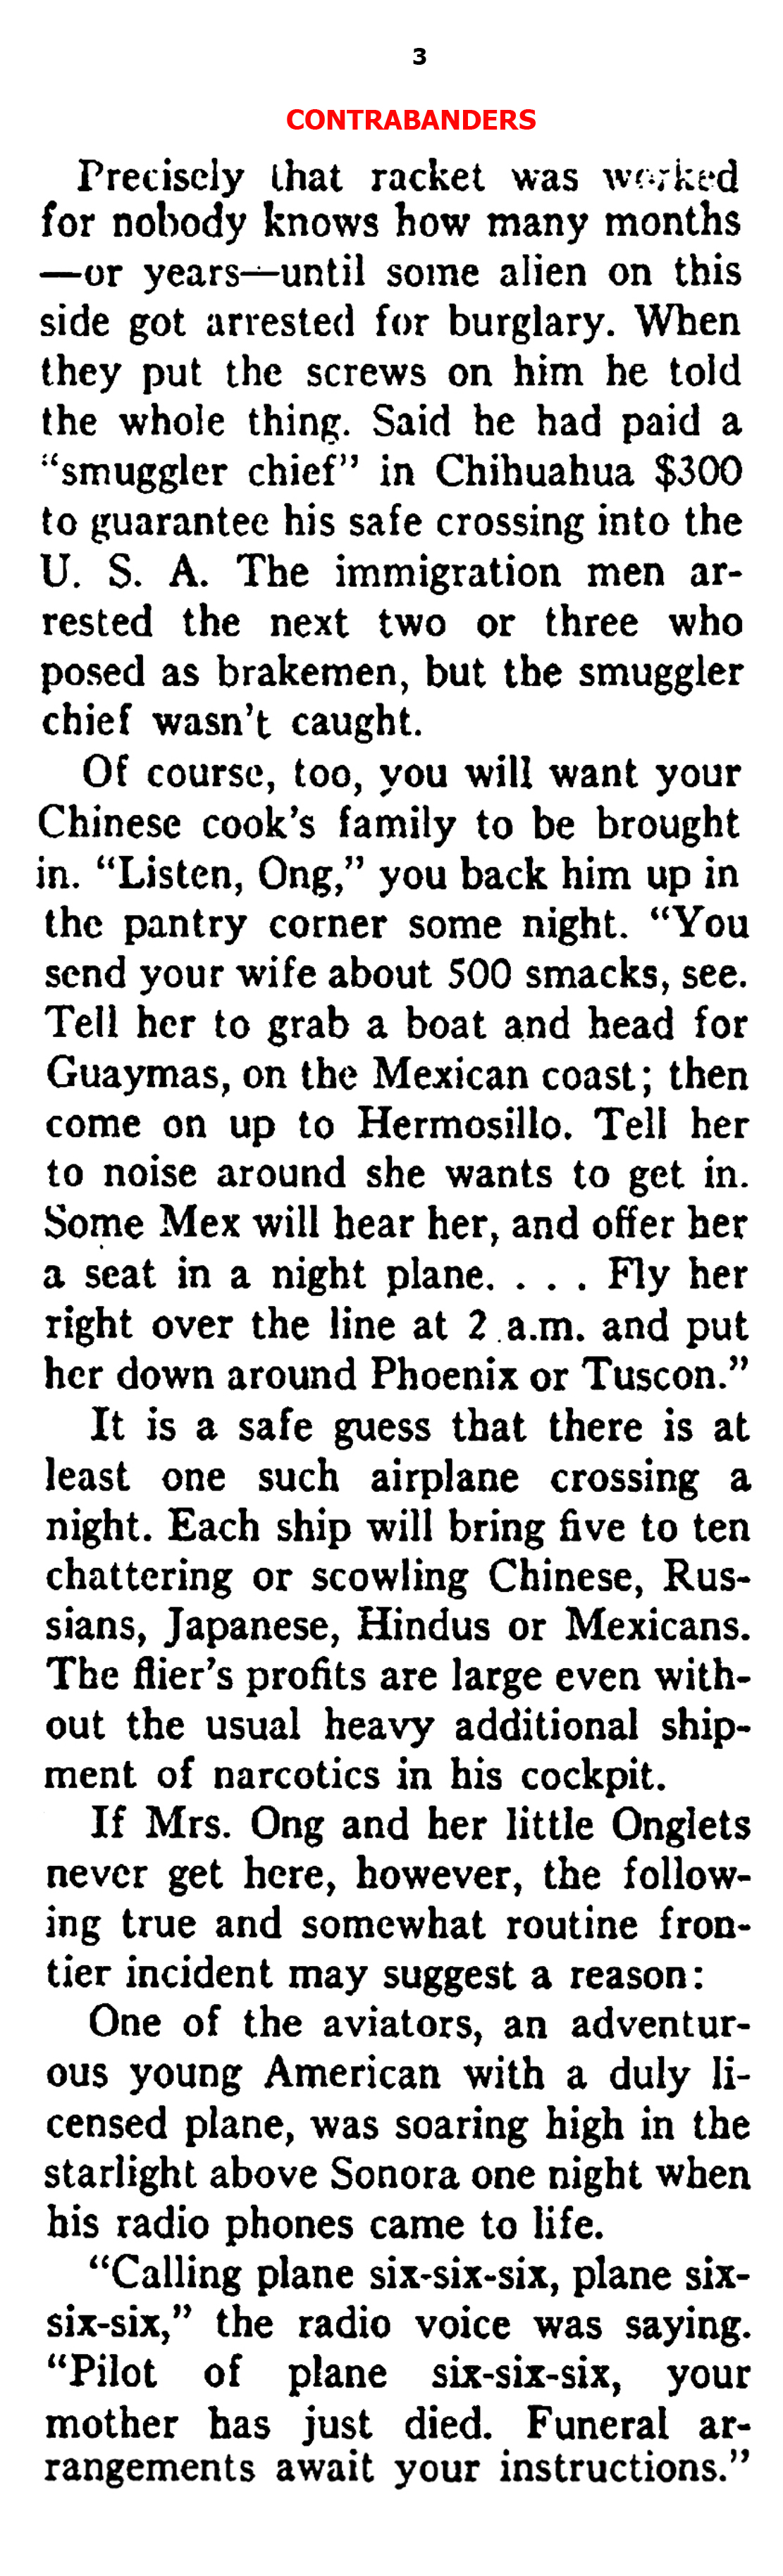 There was Illegal Immigration from Mexico Back Then, Too (Ken Magazine, 1938)